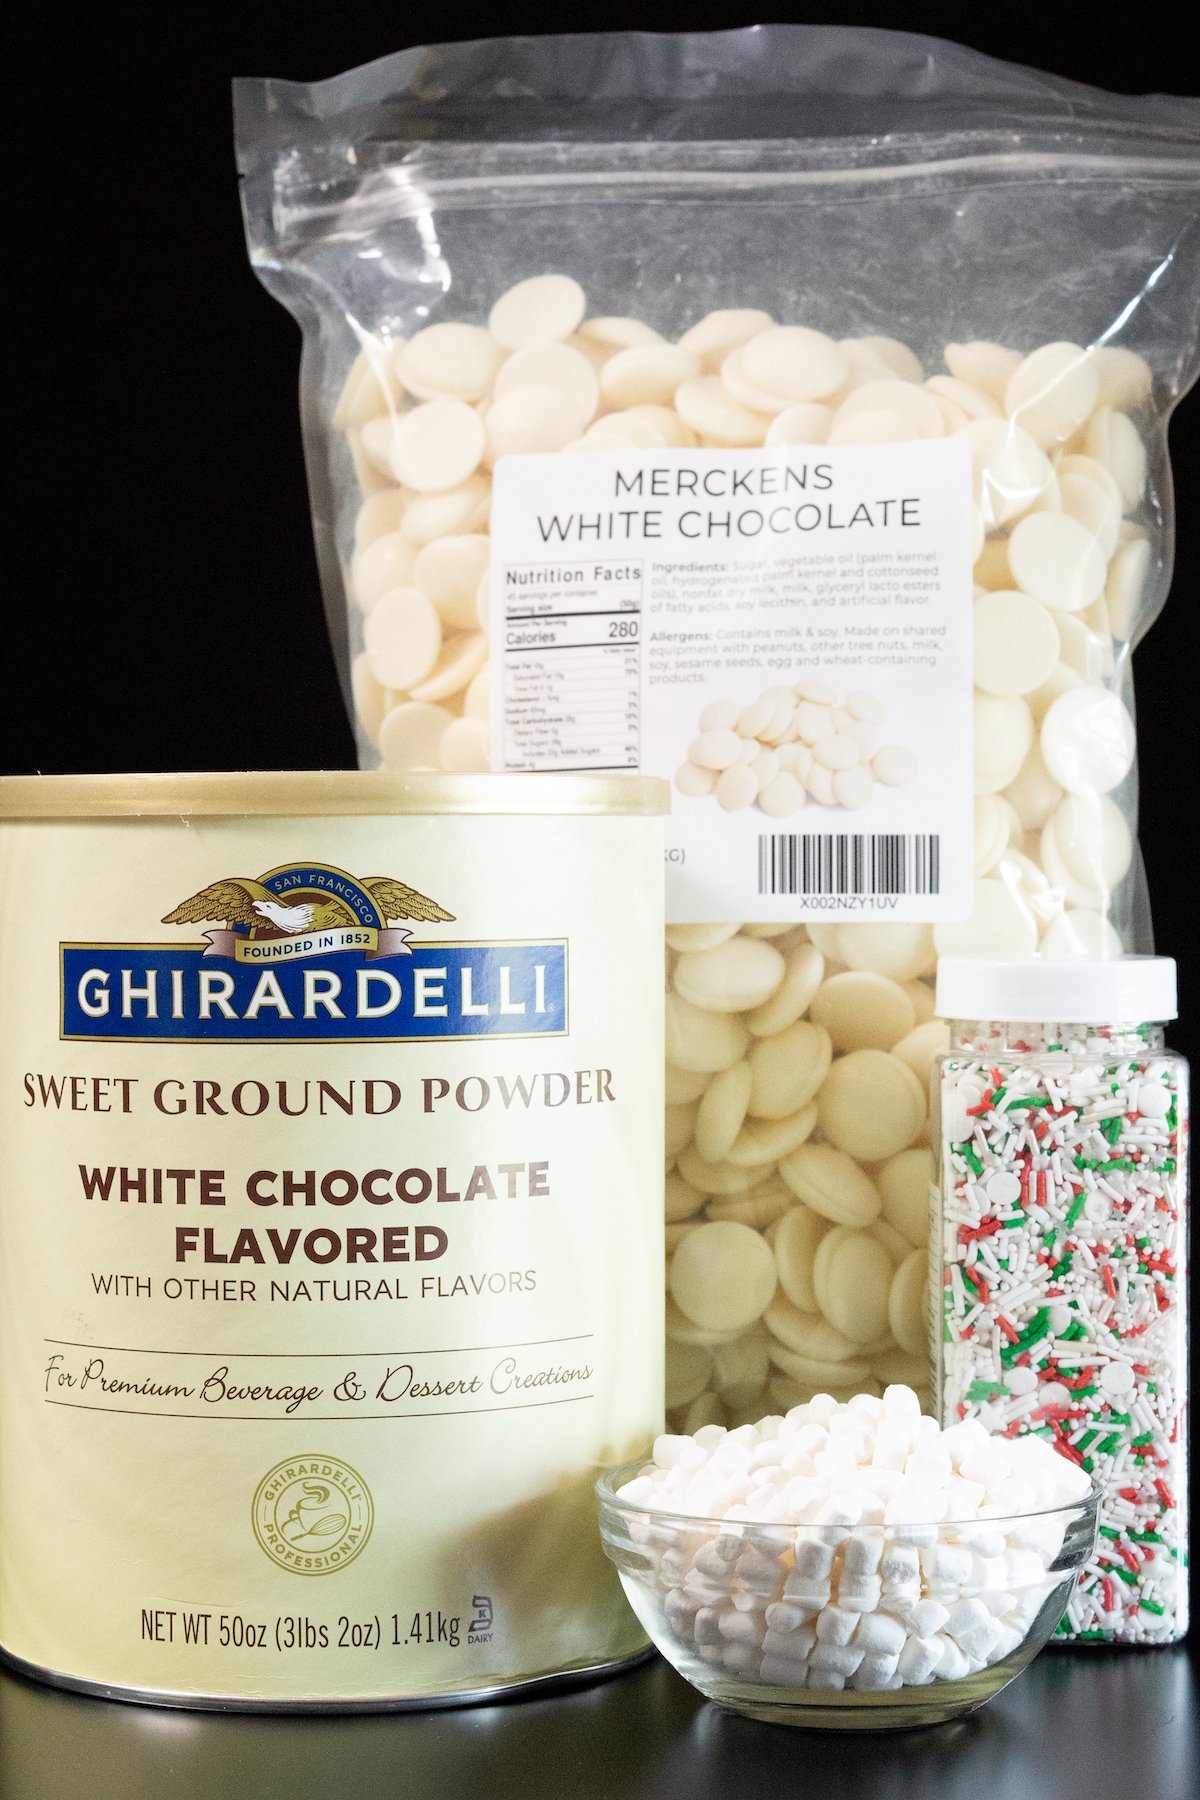 All the ingredients to make white hot chocolate bombs sit on a black background - a tub of Ghirardelli white chocolate powder, dehydrated marshmallows, white chocolate melts, and sprinkles.